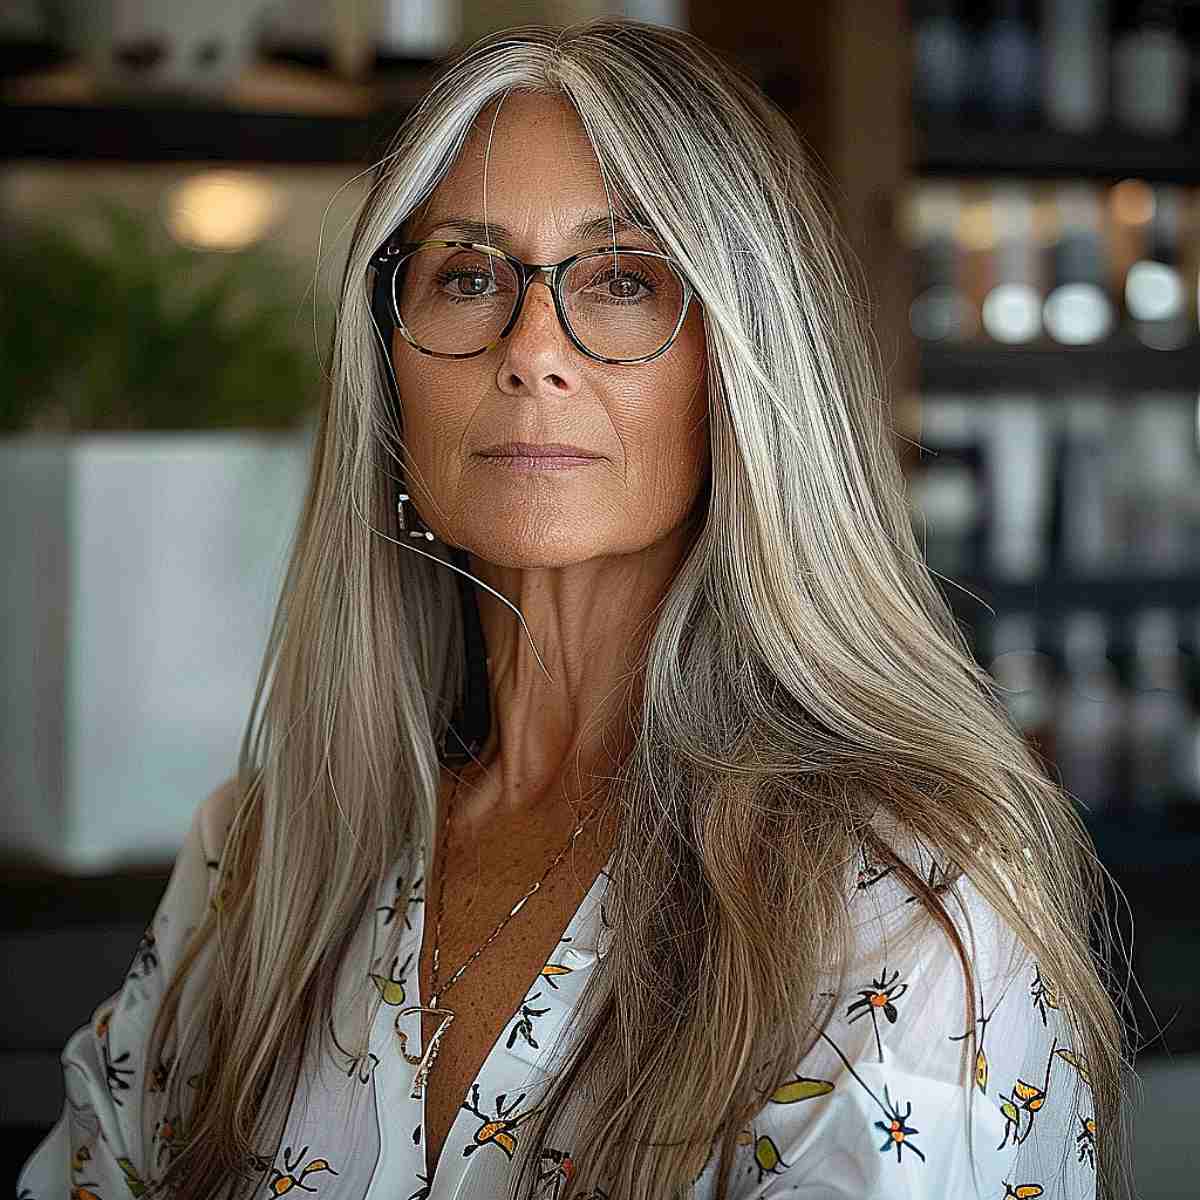 Long Hair with Glasses for a lady in her 60s